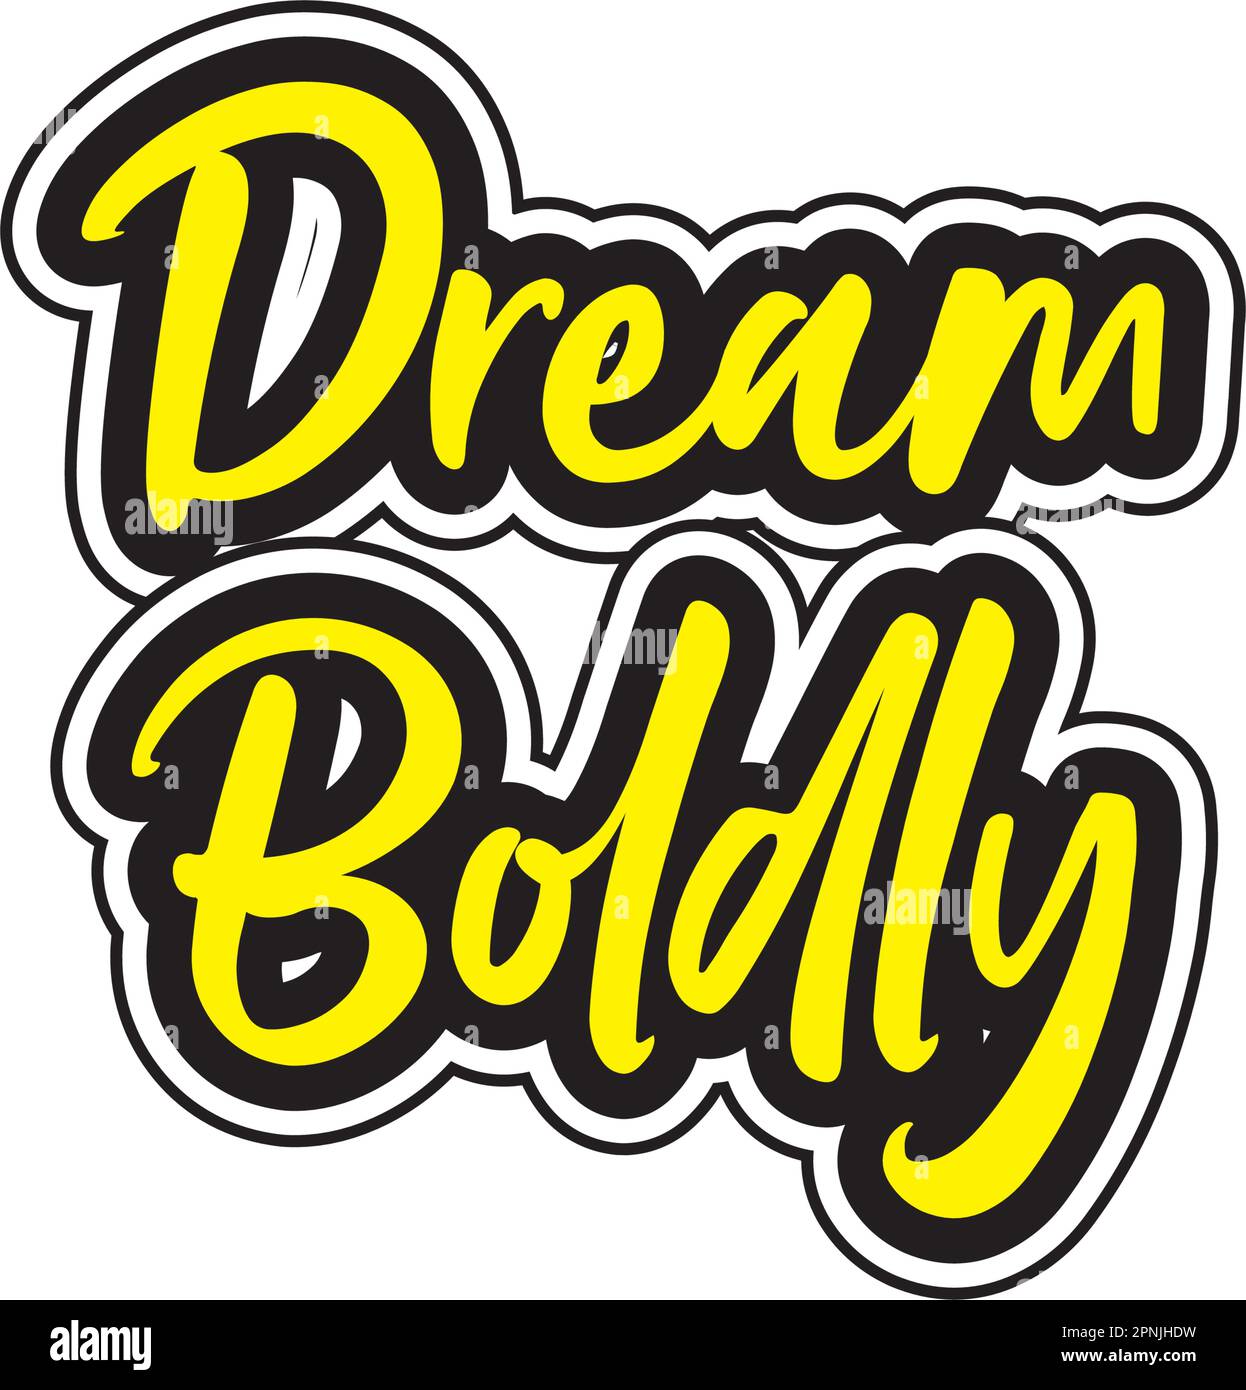 Dream boldly motivational and inspirational lettering colorful style text typography t shirt design on white background Stock Vector